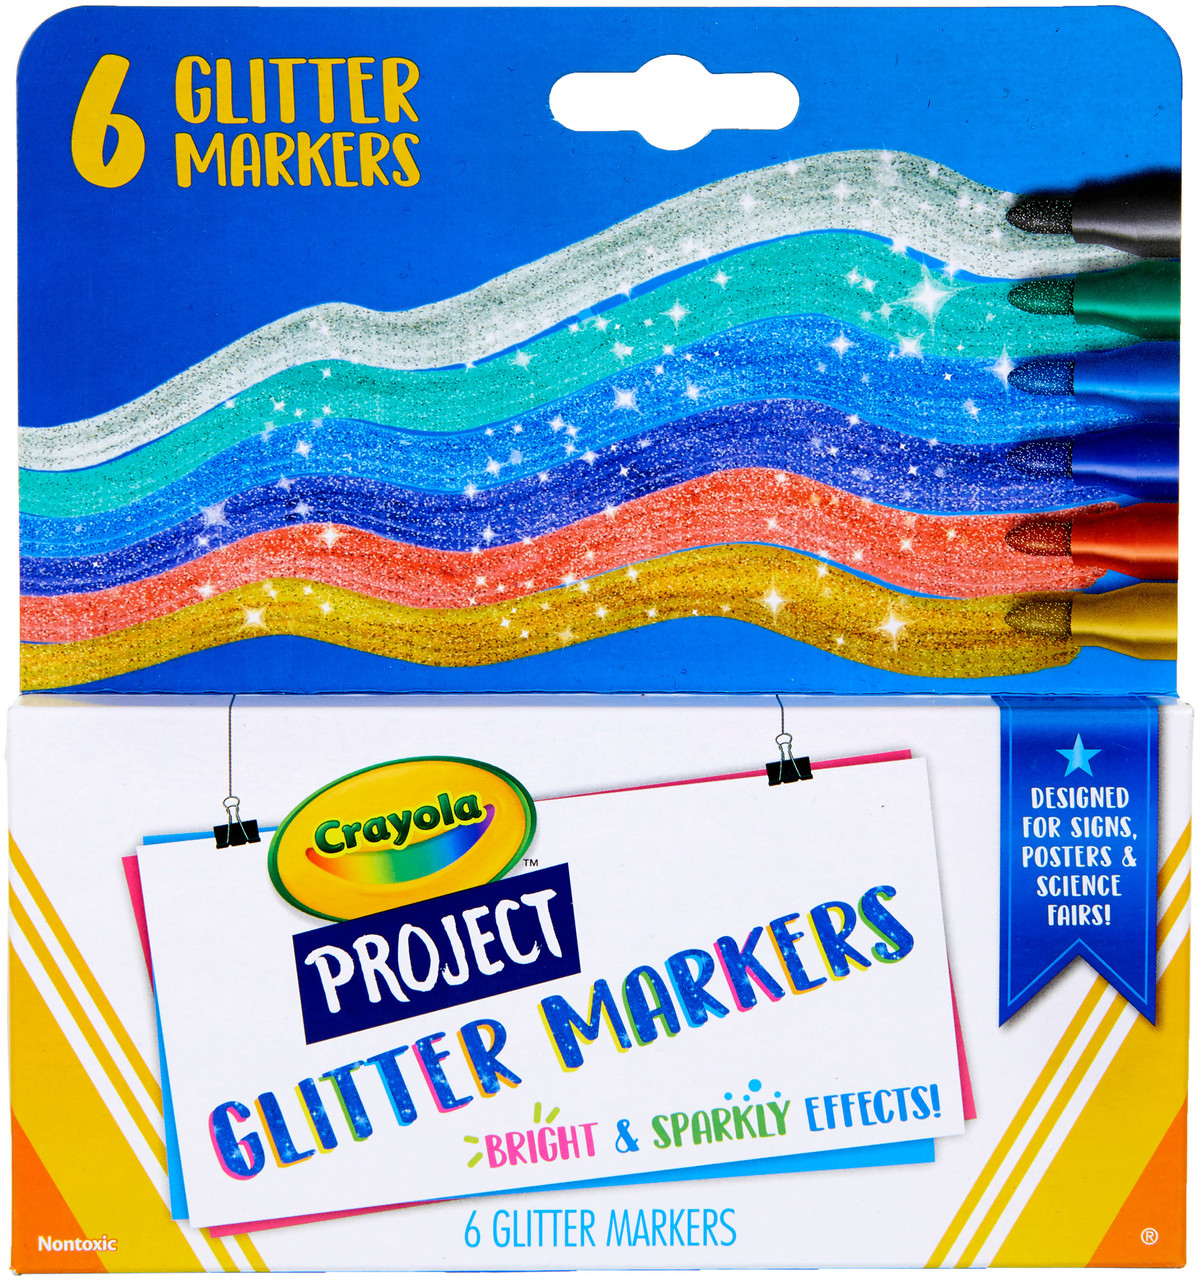 Crayola Glitter Markers, 6 pk - Foods Co.